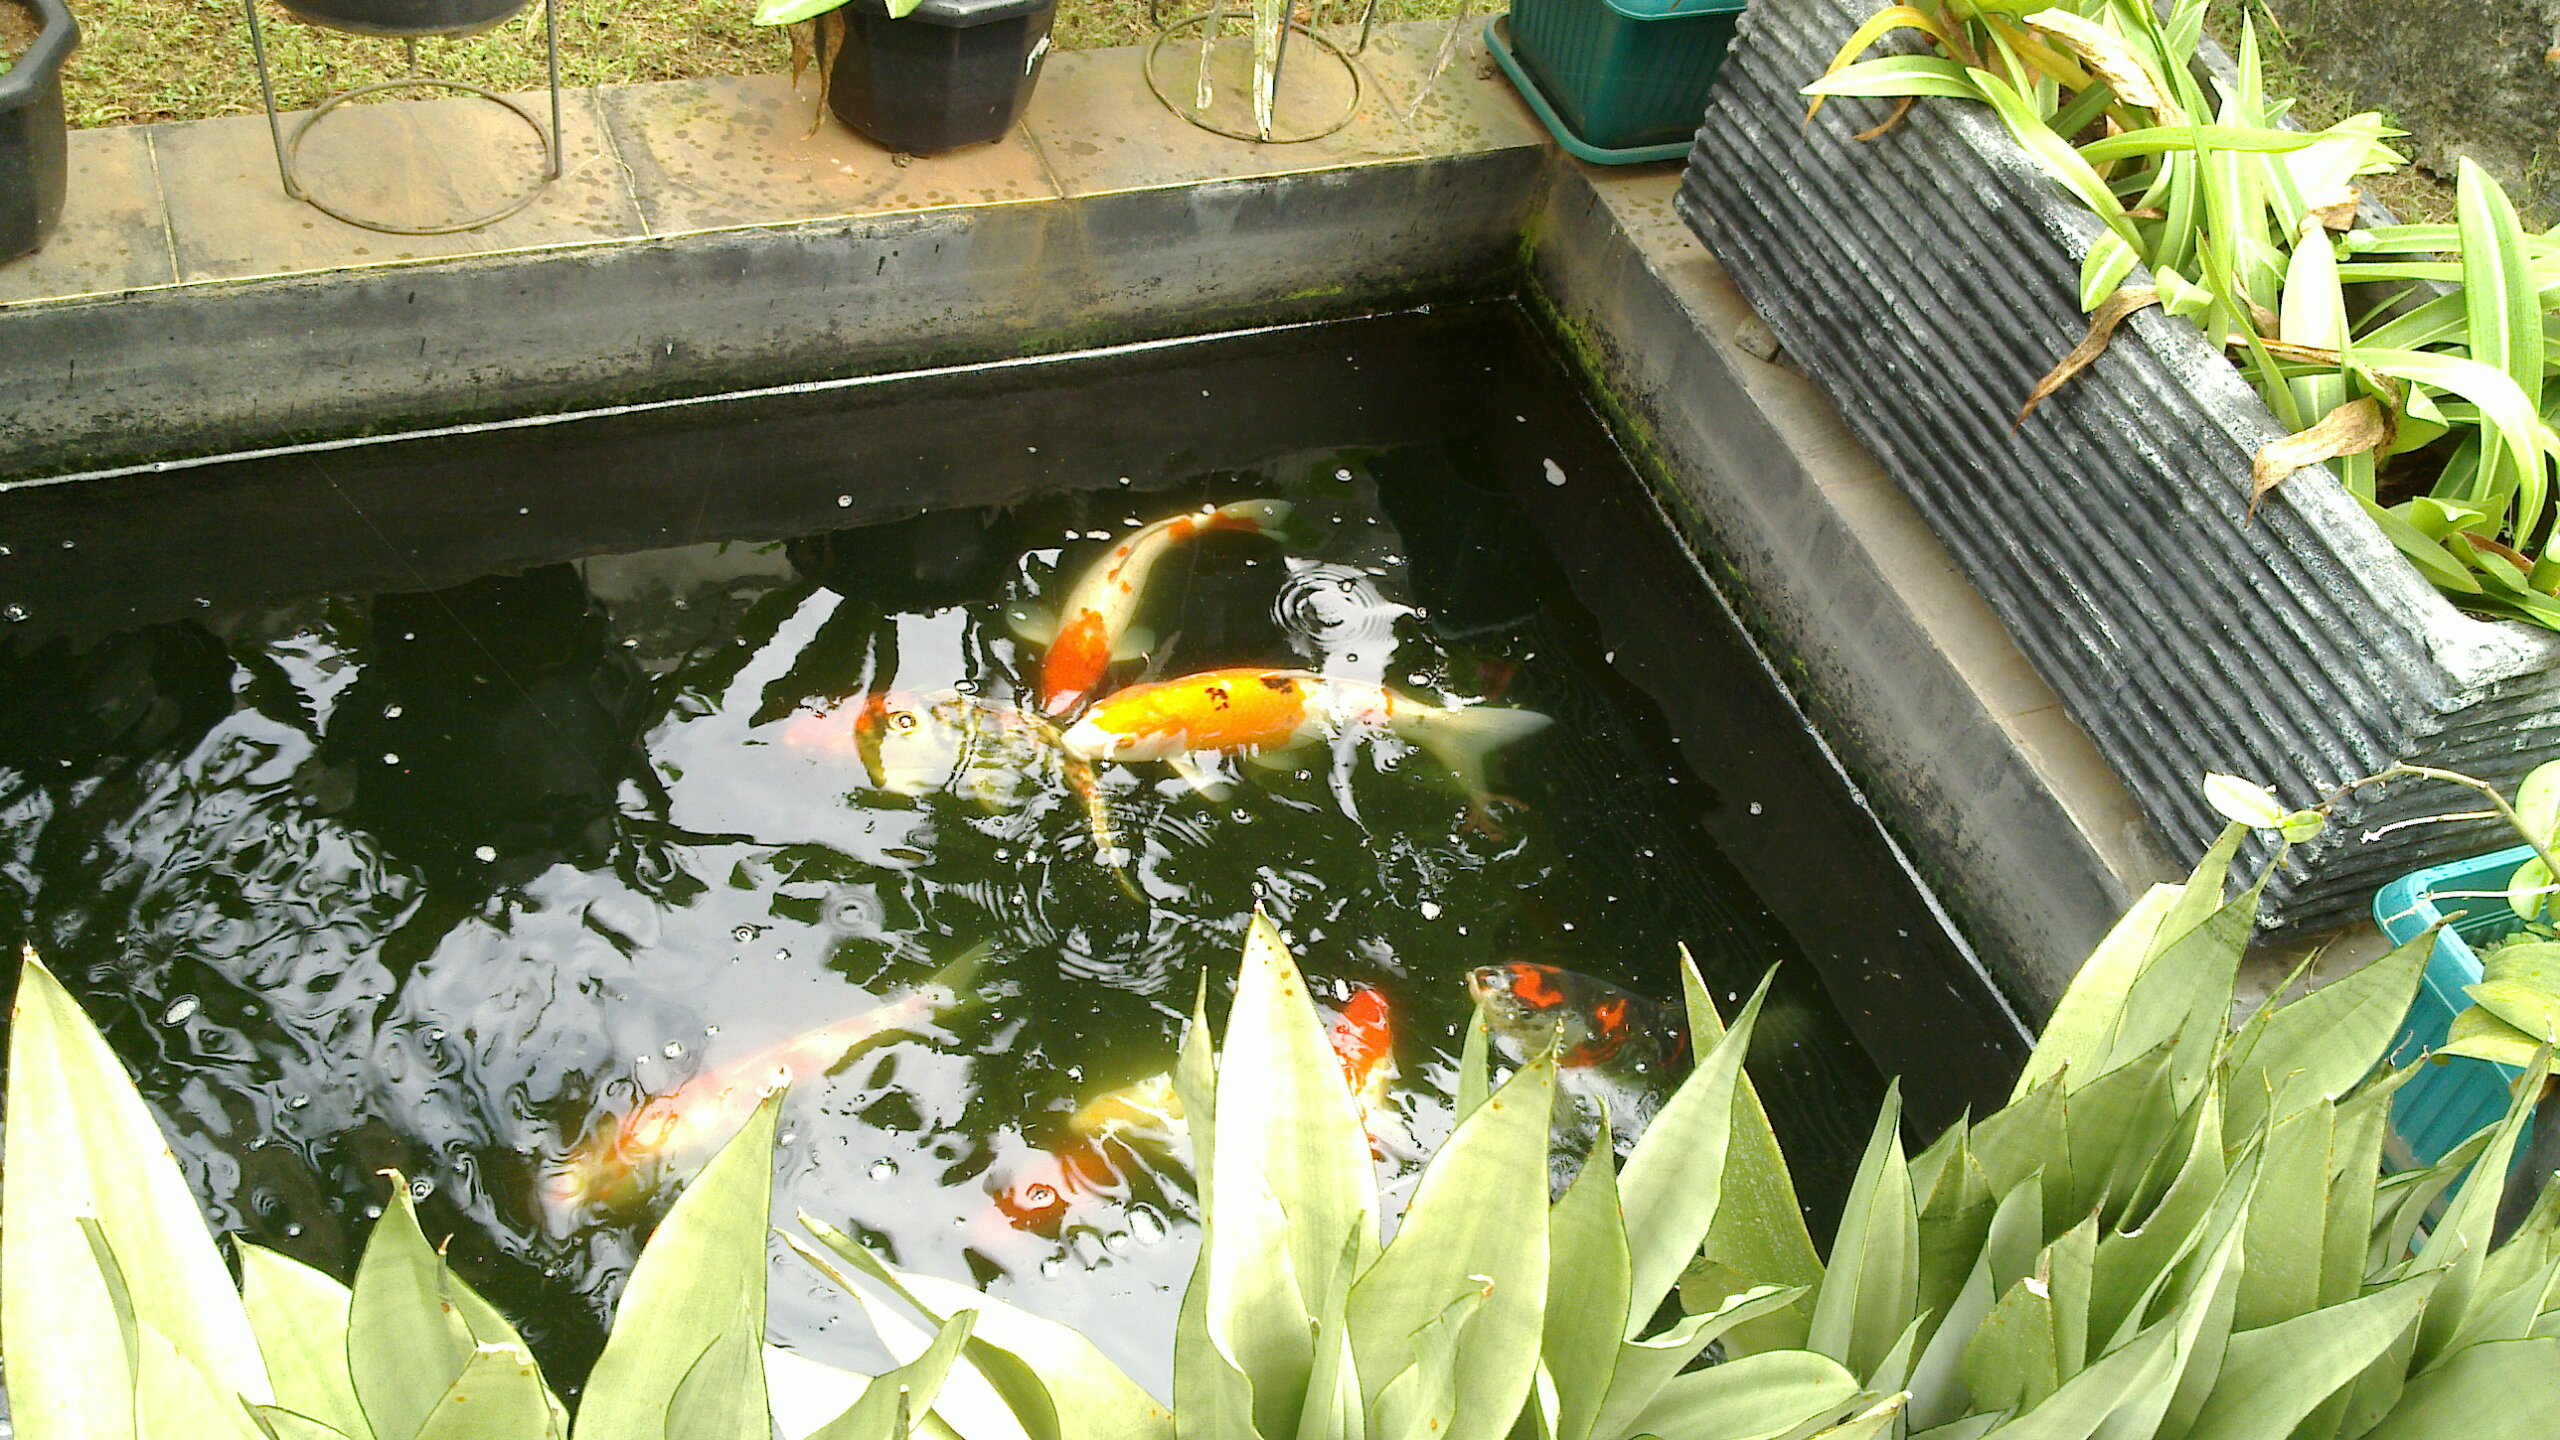 large fish are in a large pond by some plants